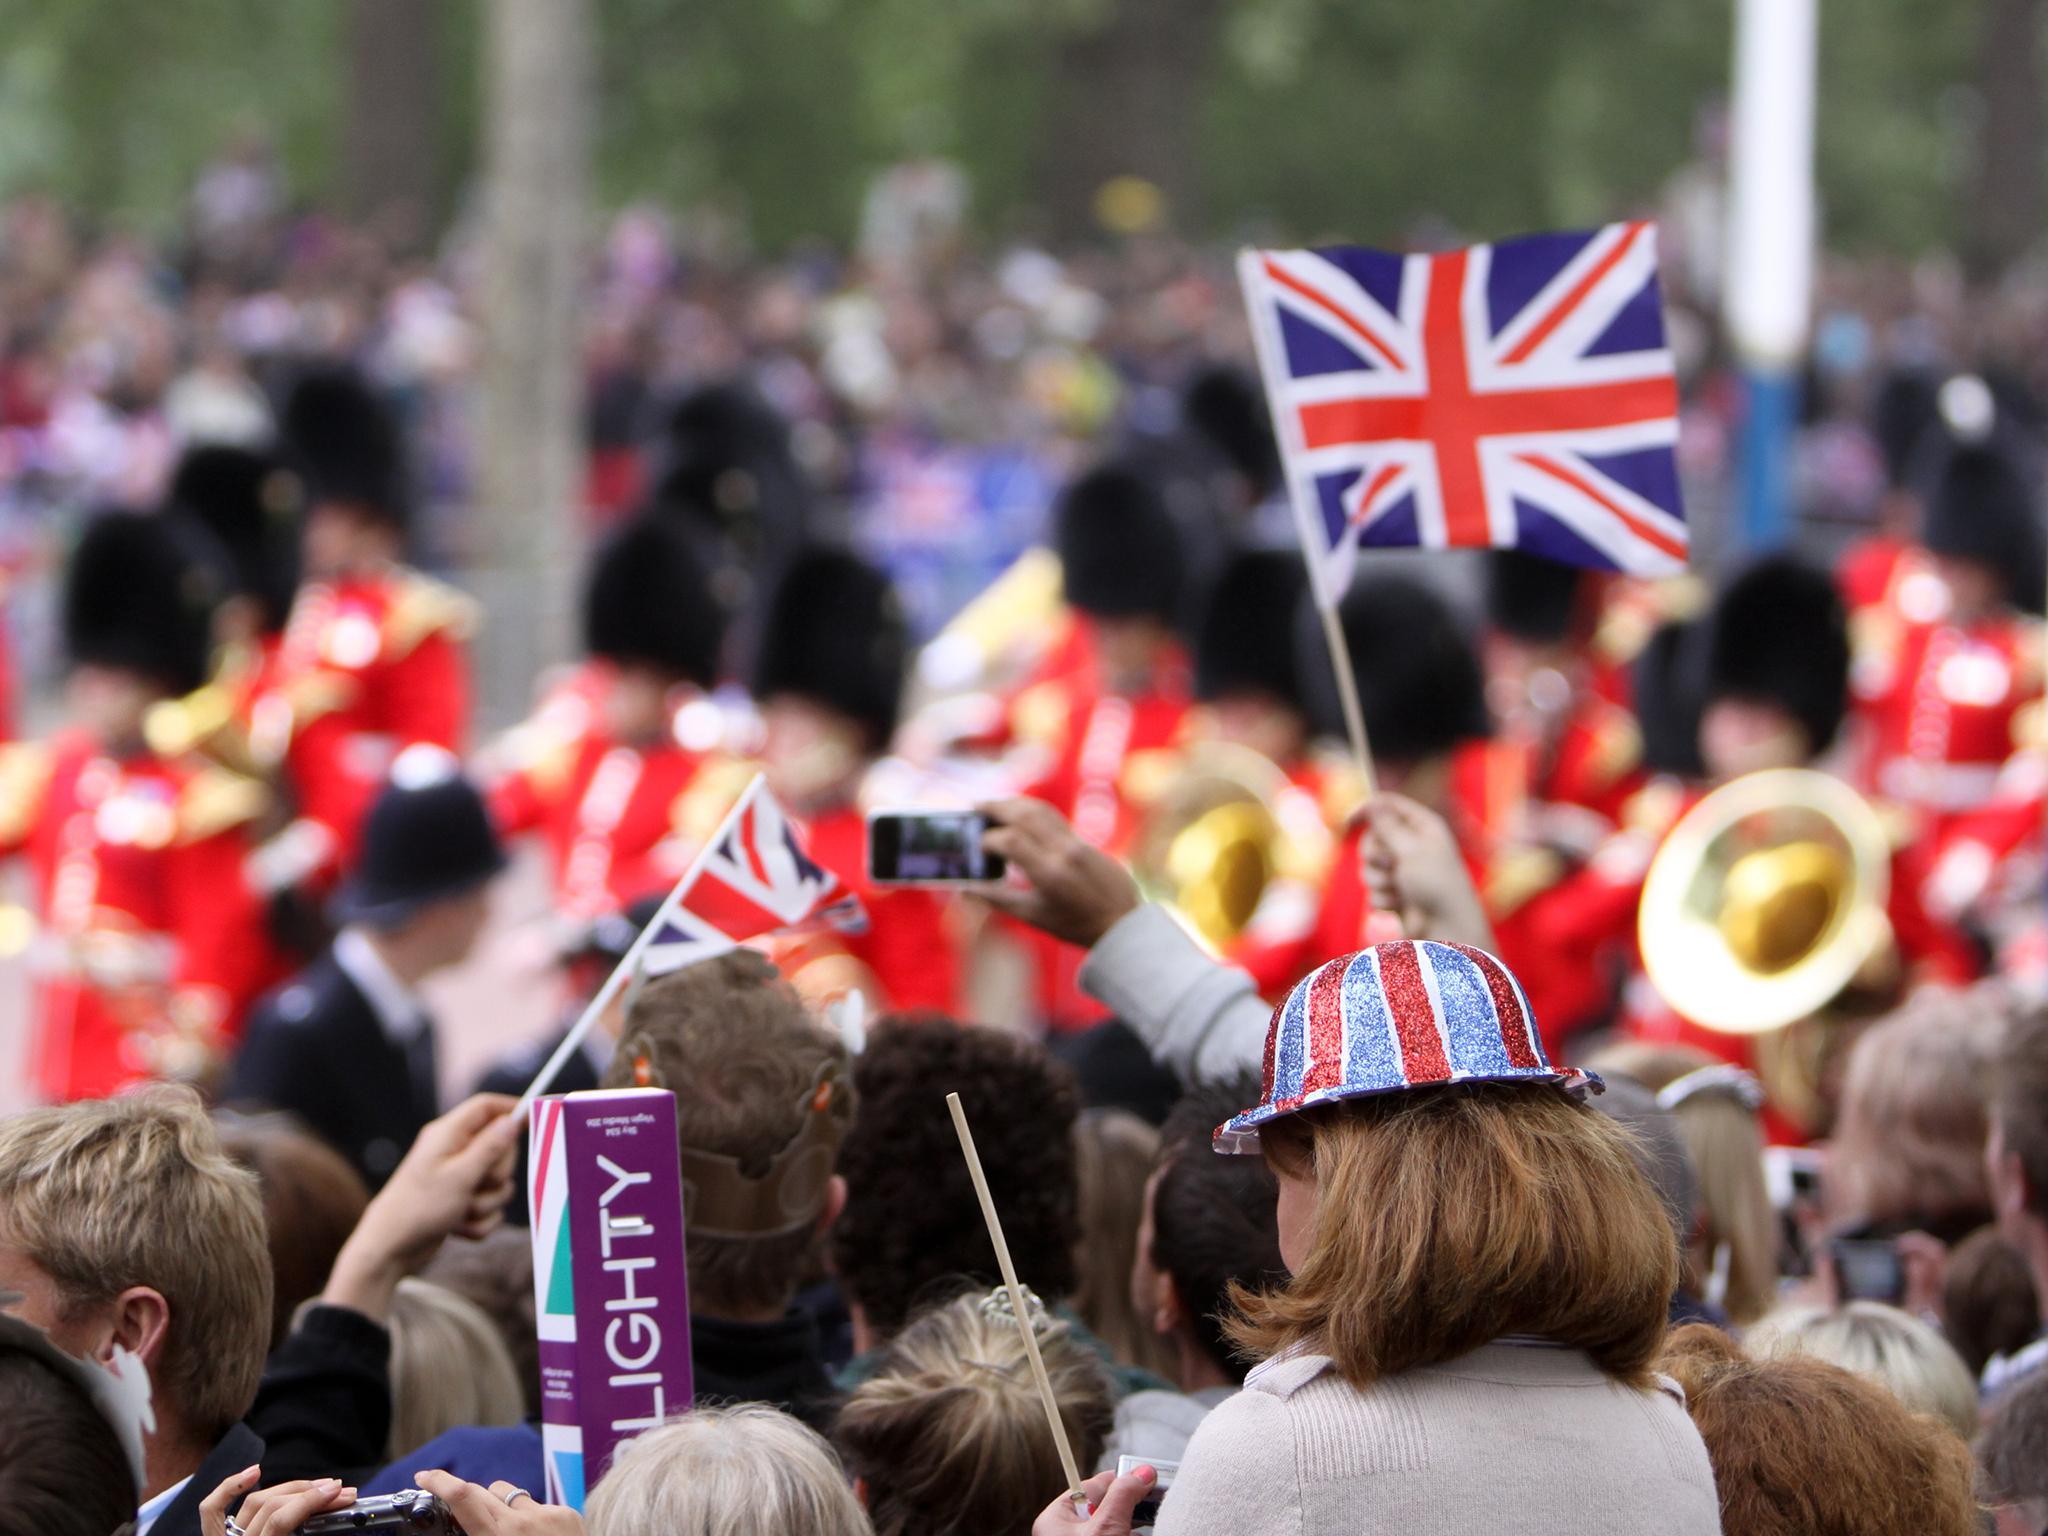 Britons afraid to show national pride in public for fear of ridicule or abuse, poll finds